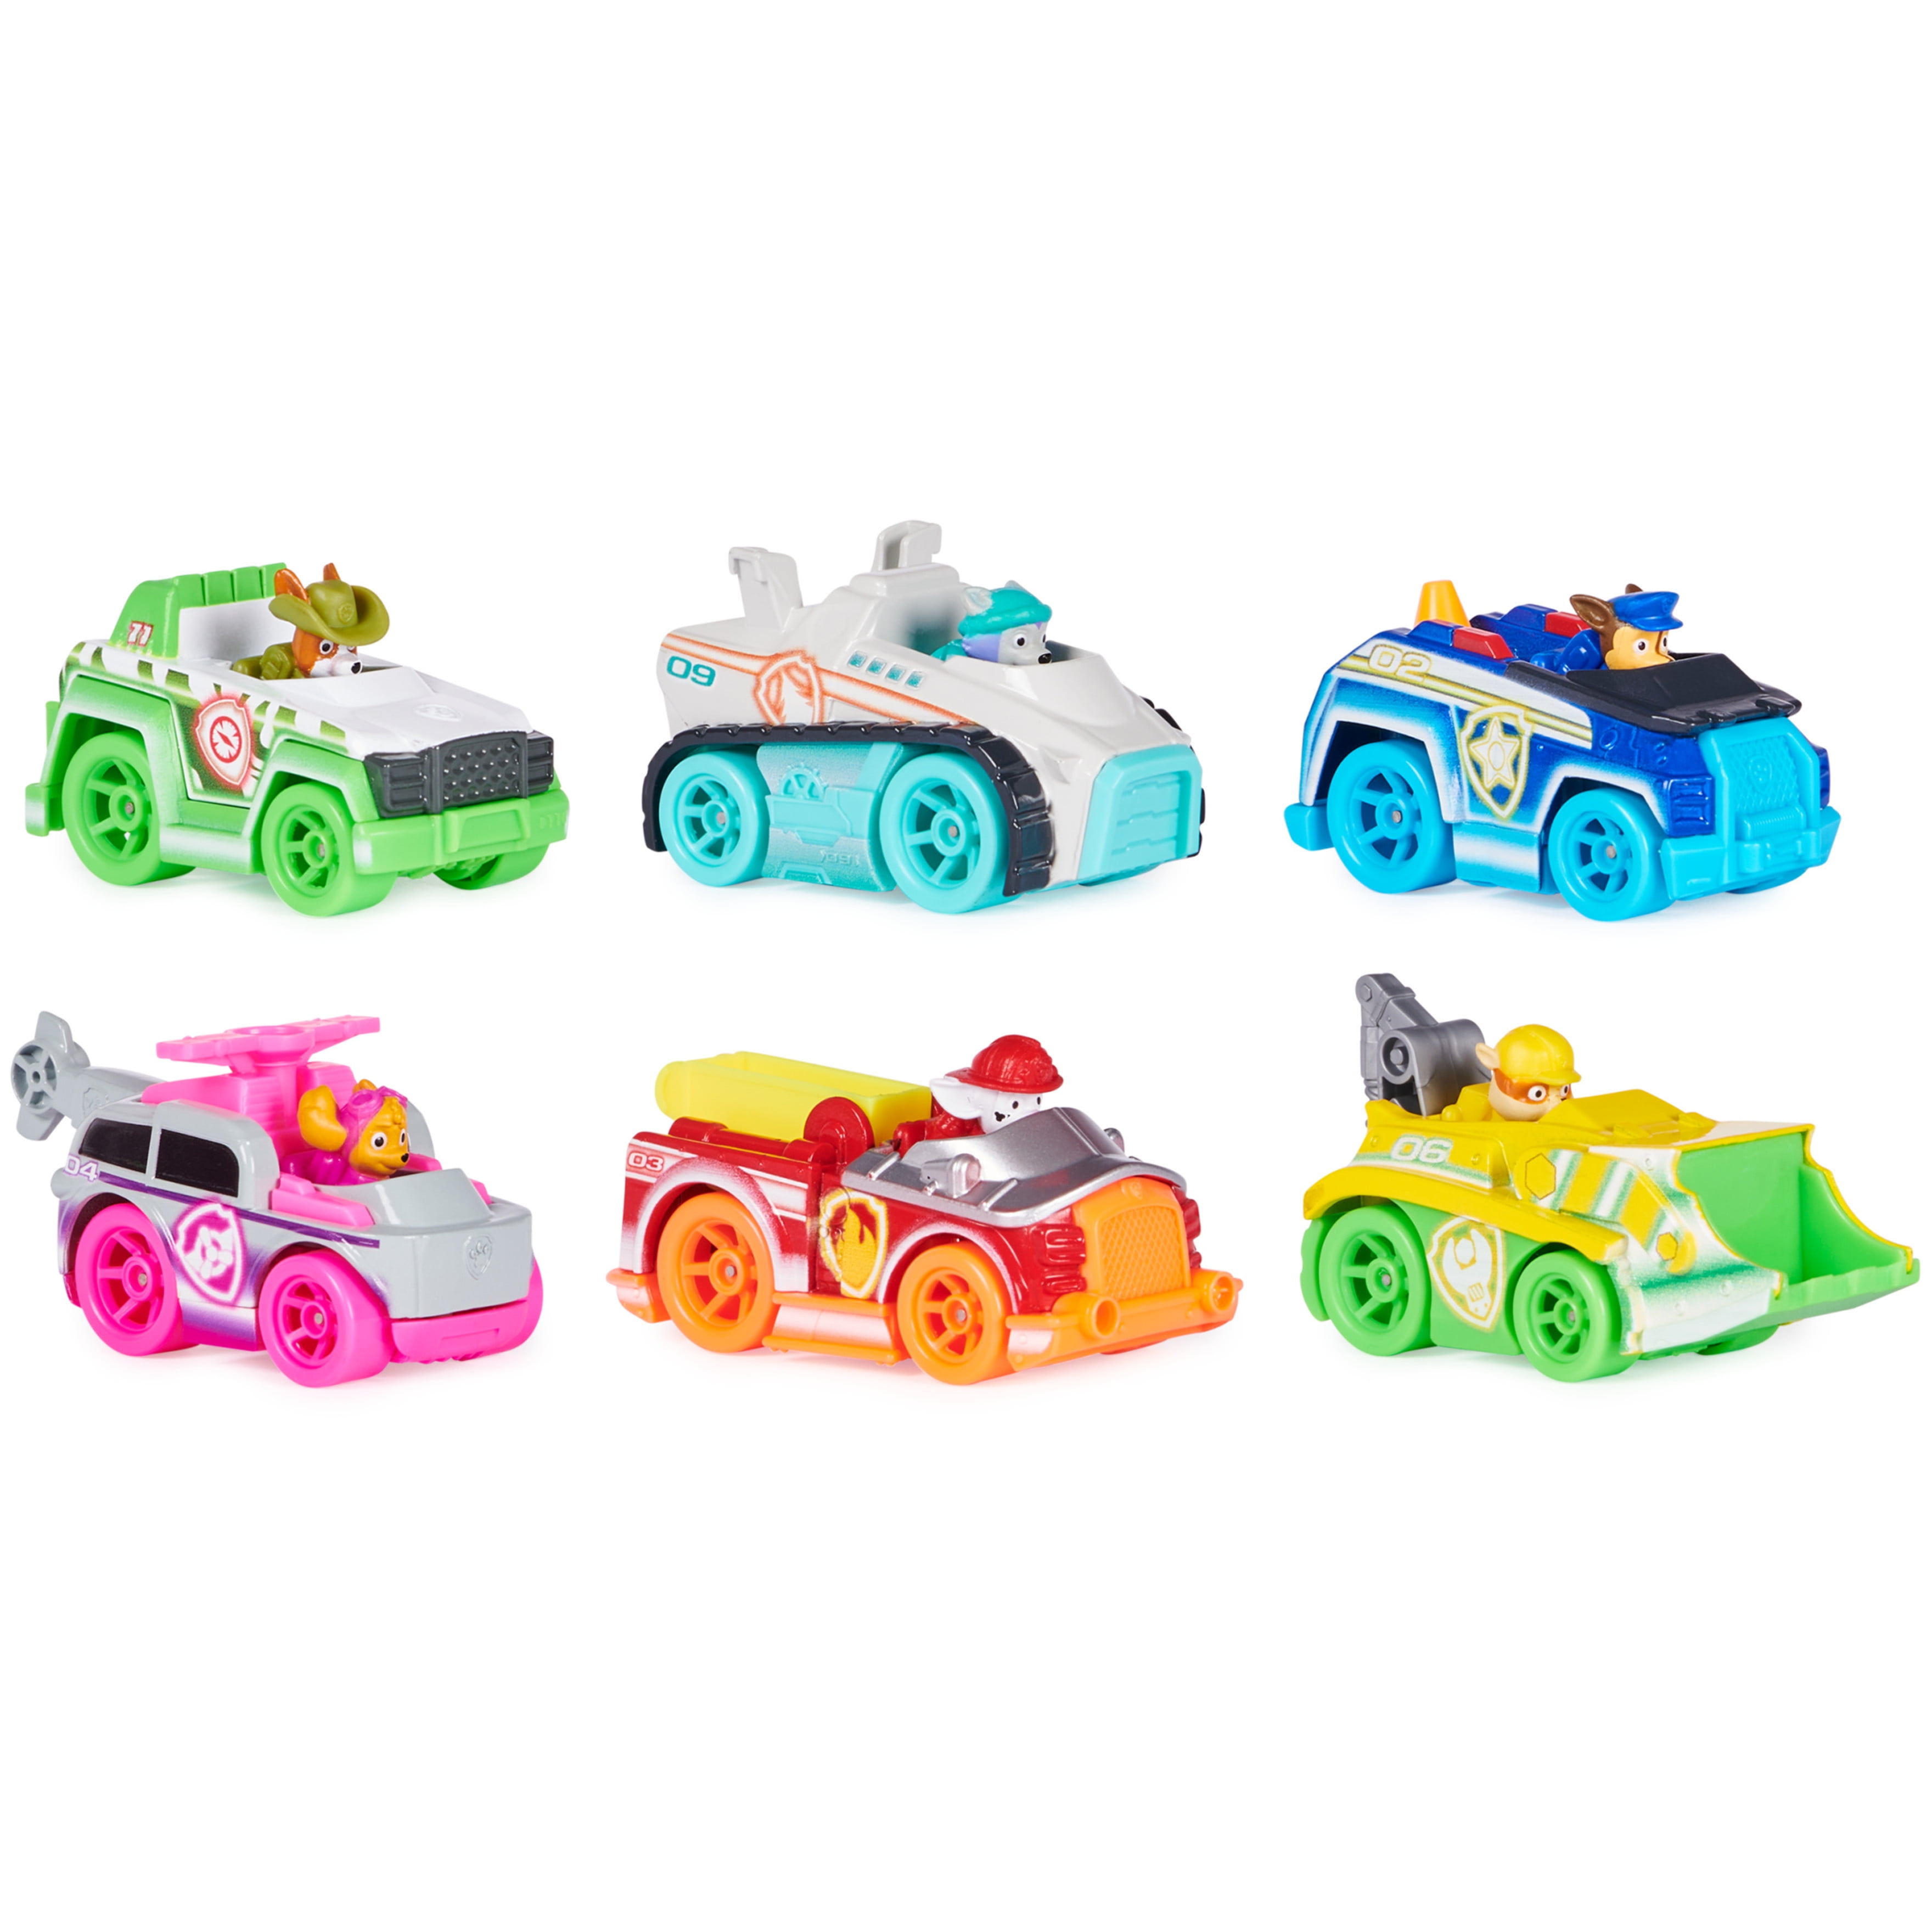 PAW Patrol, True Metal Neon Rescue Vehicle 6-Piece Gift Pack Die-Cast Toy Cars, 1:55 Scale